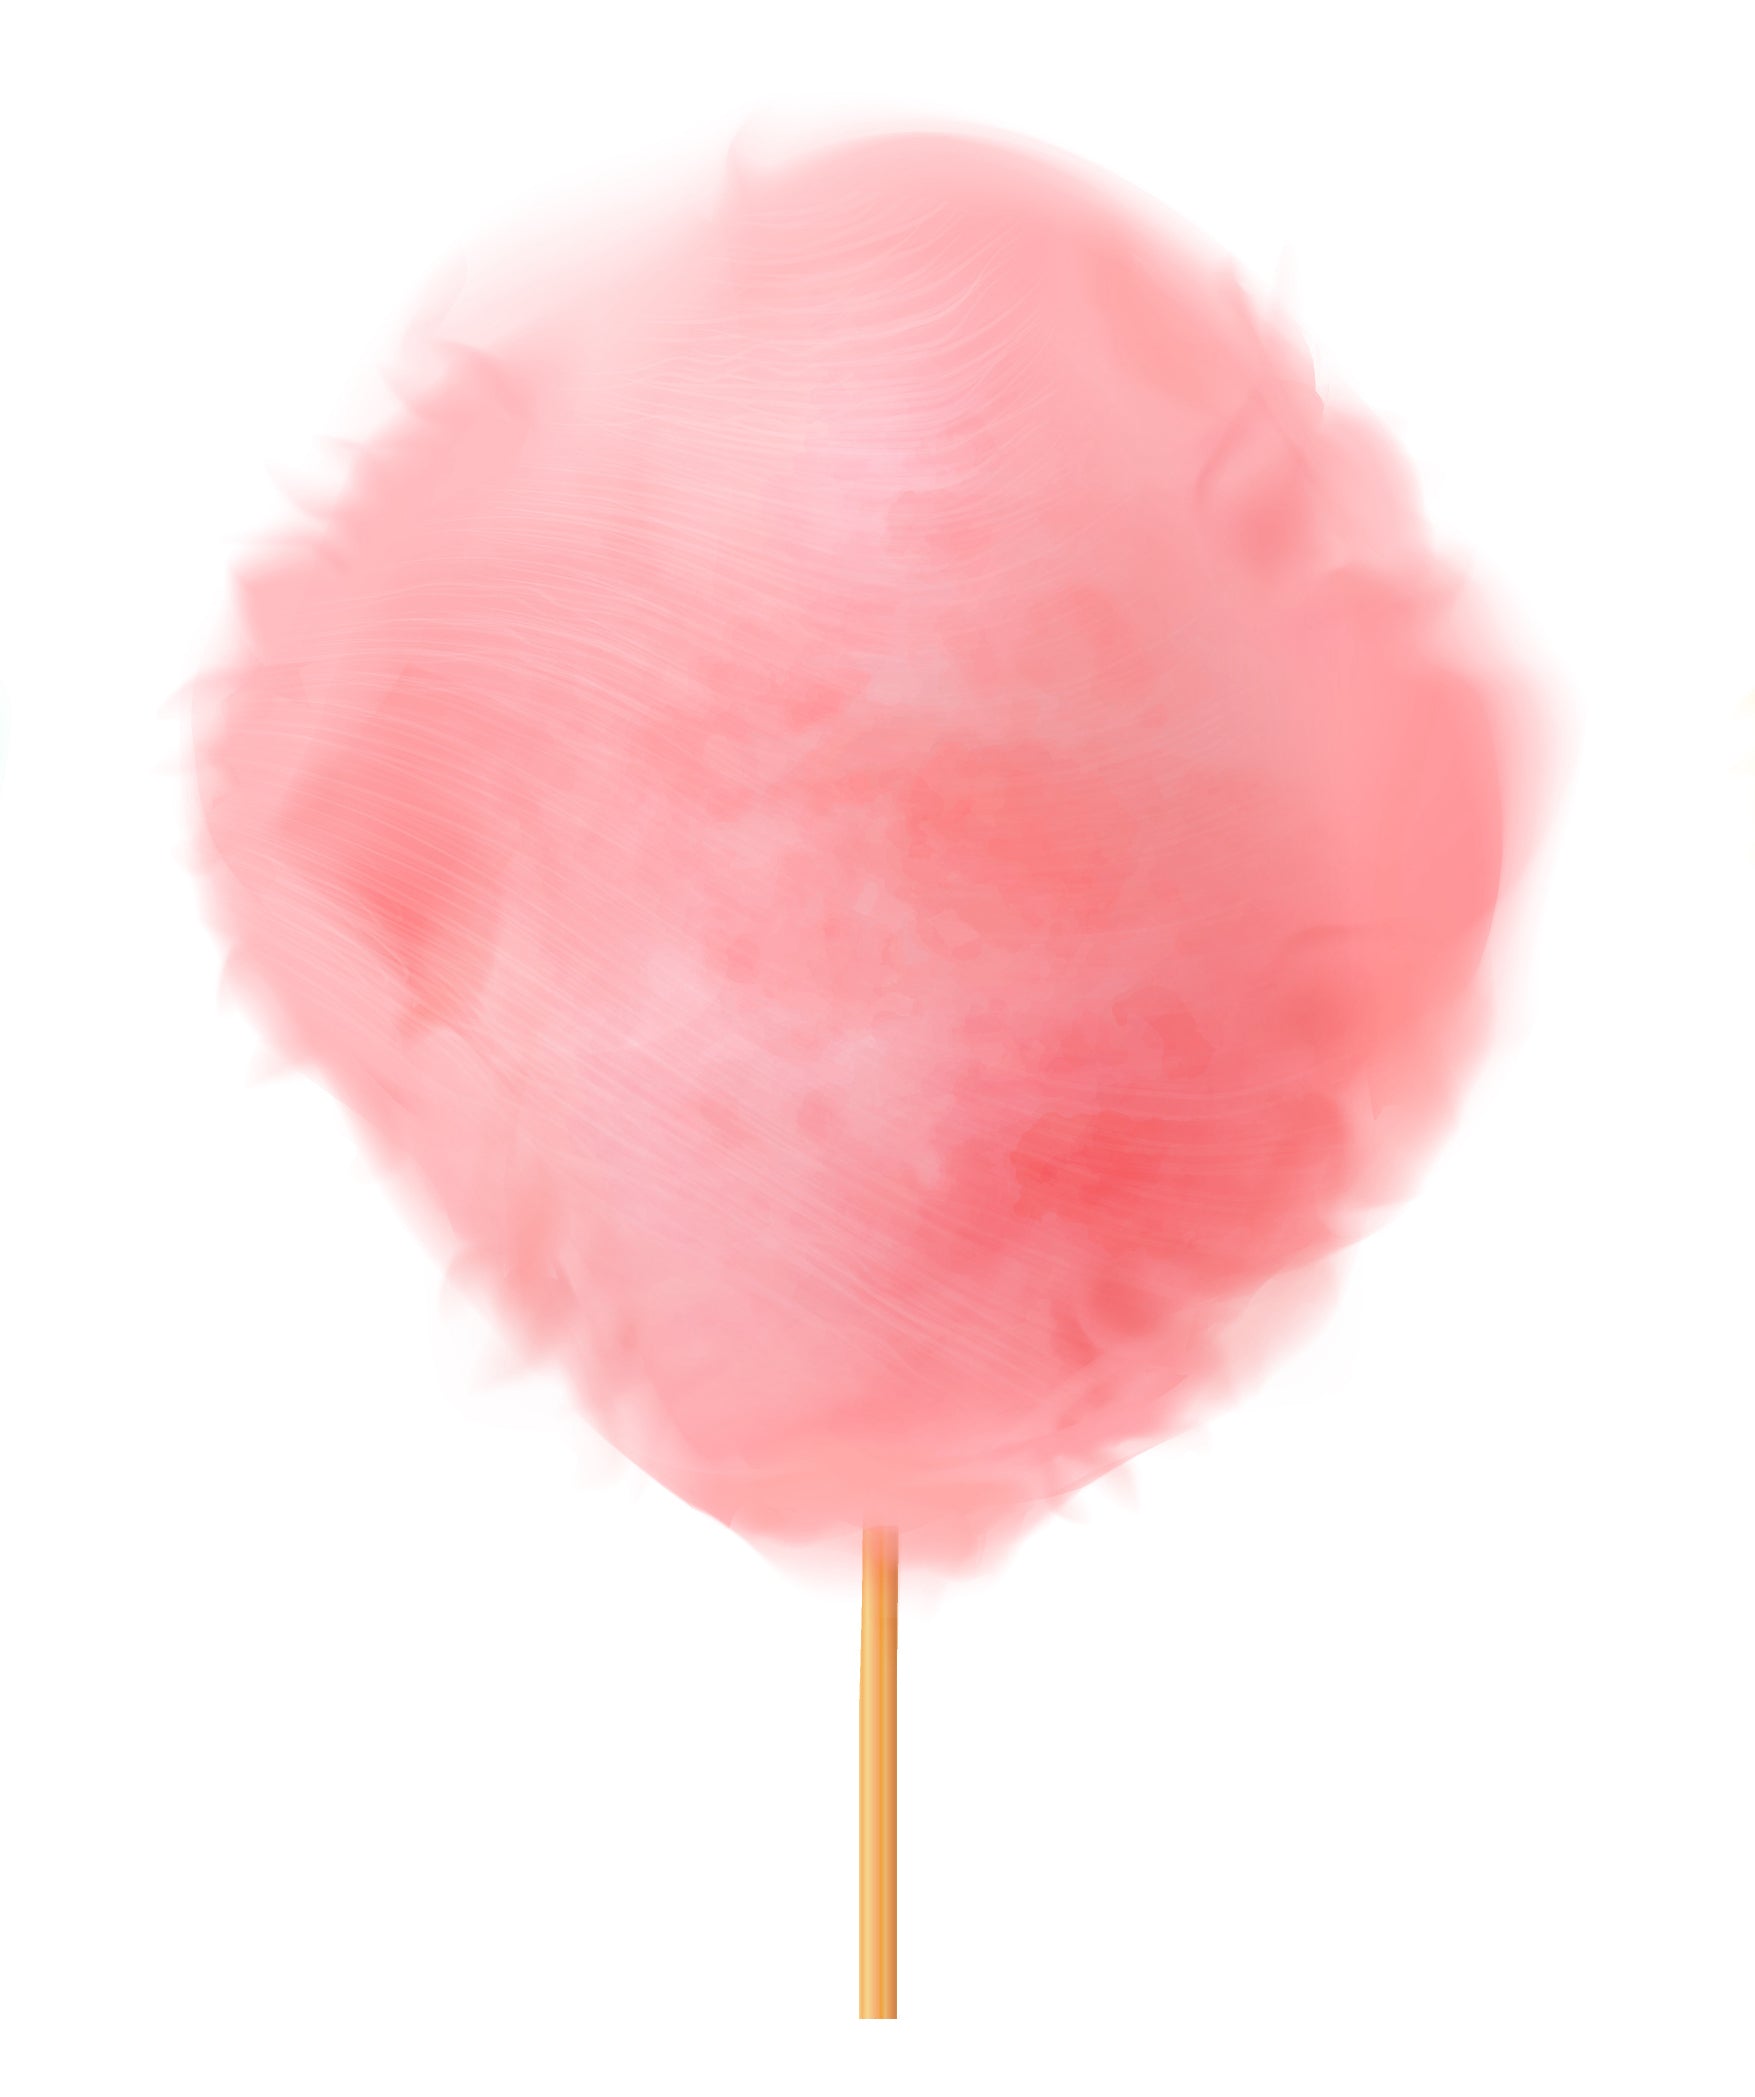 Supreme Cotton Candy Sugar of Red Cherry